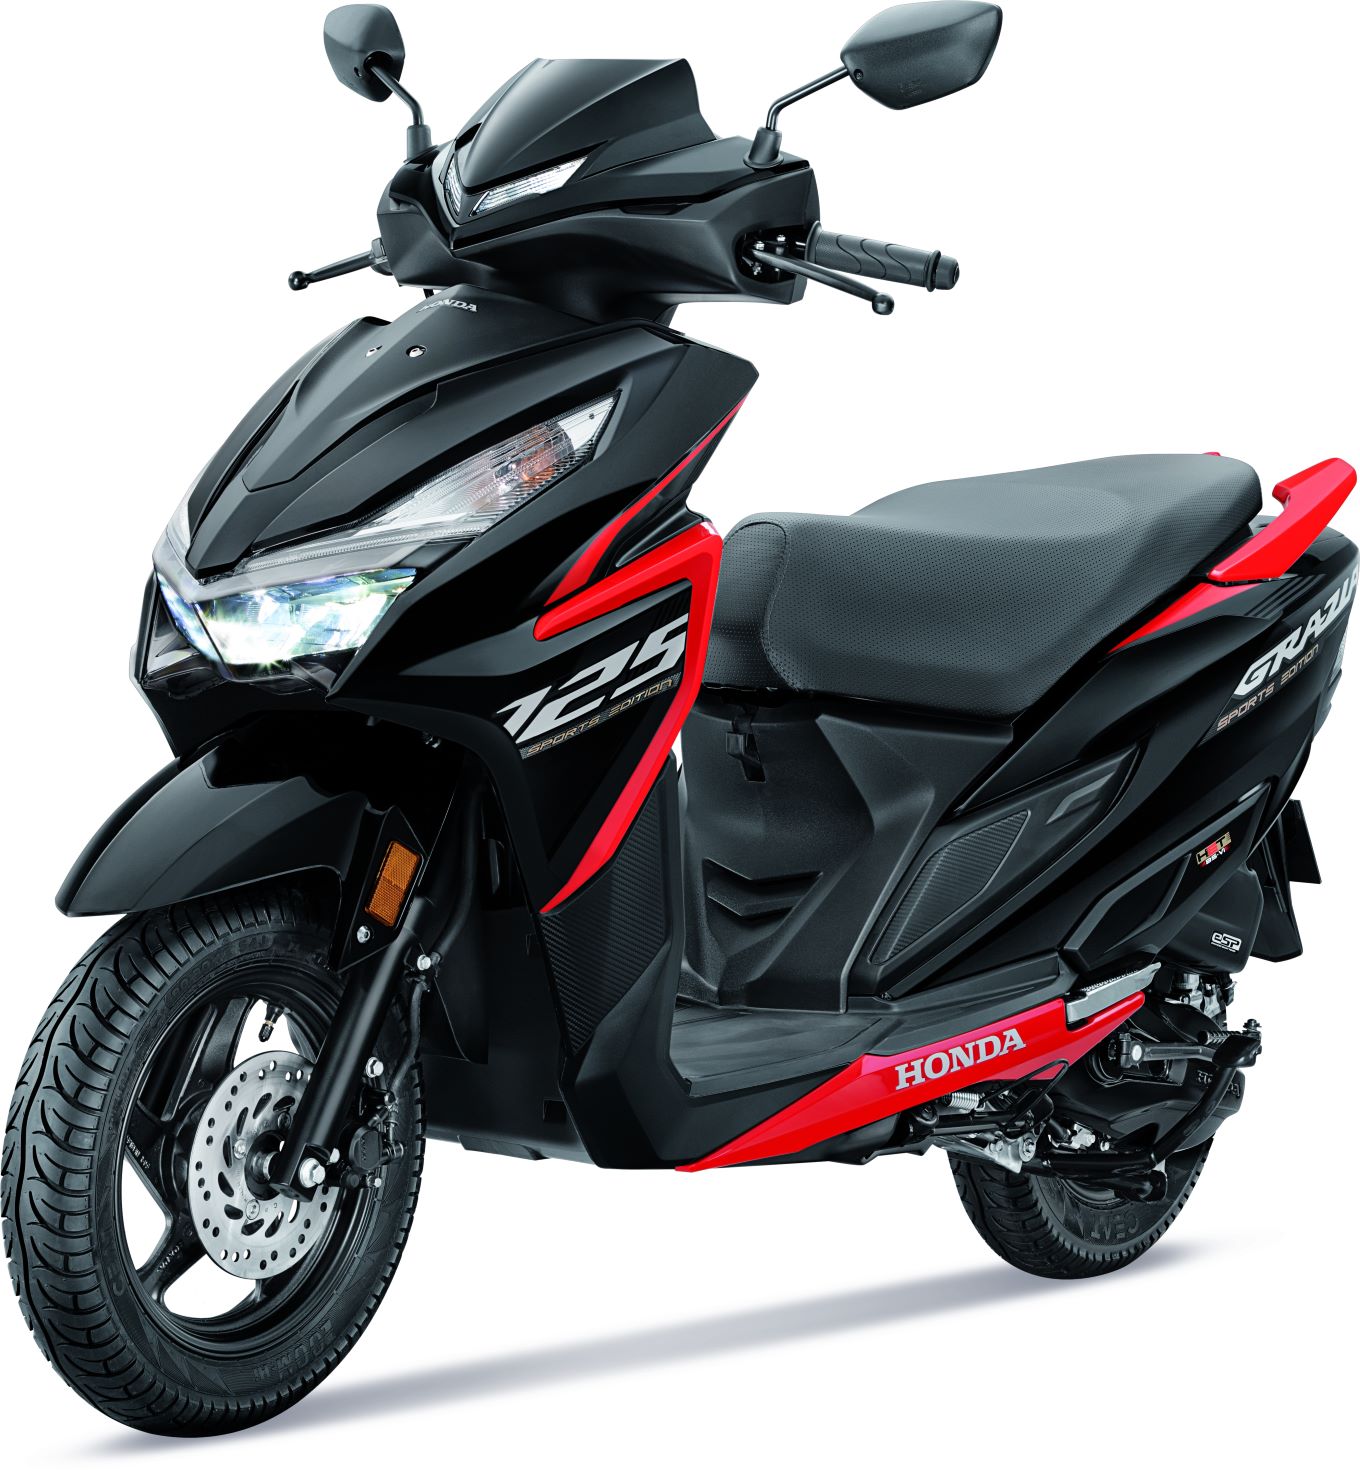 Honda Grazia 125 BS6 automatic scooter launched